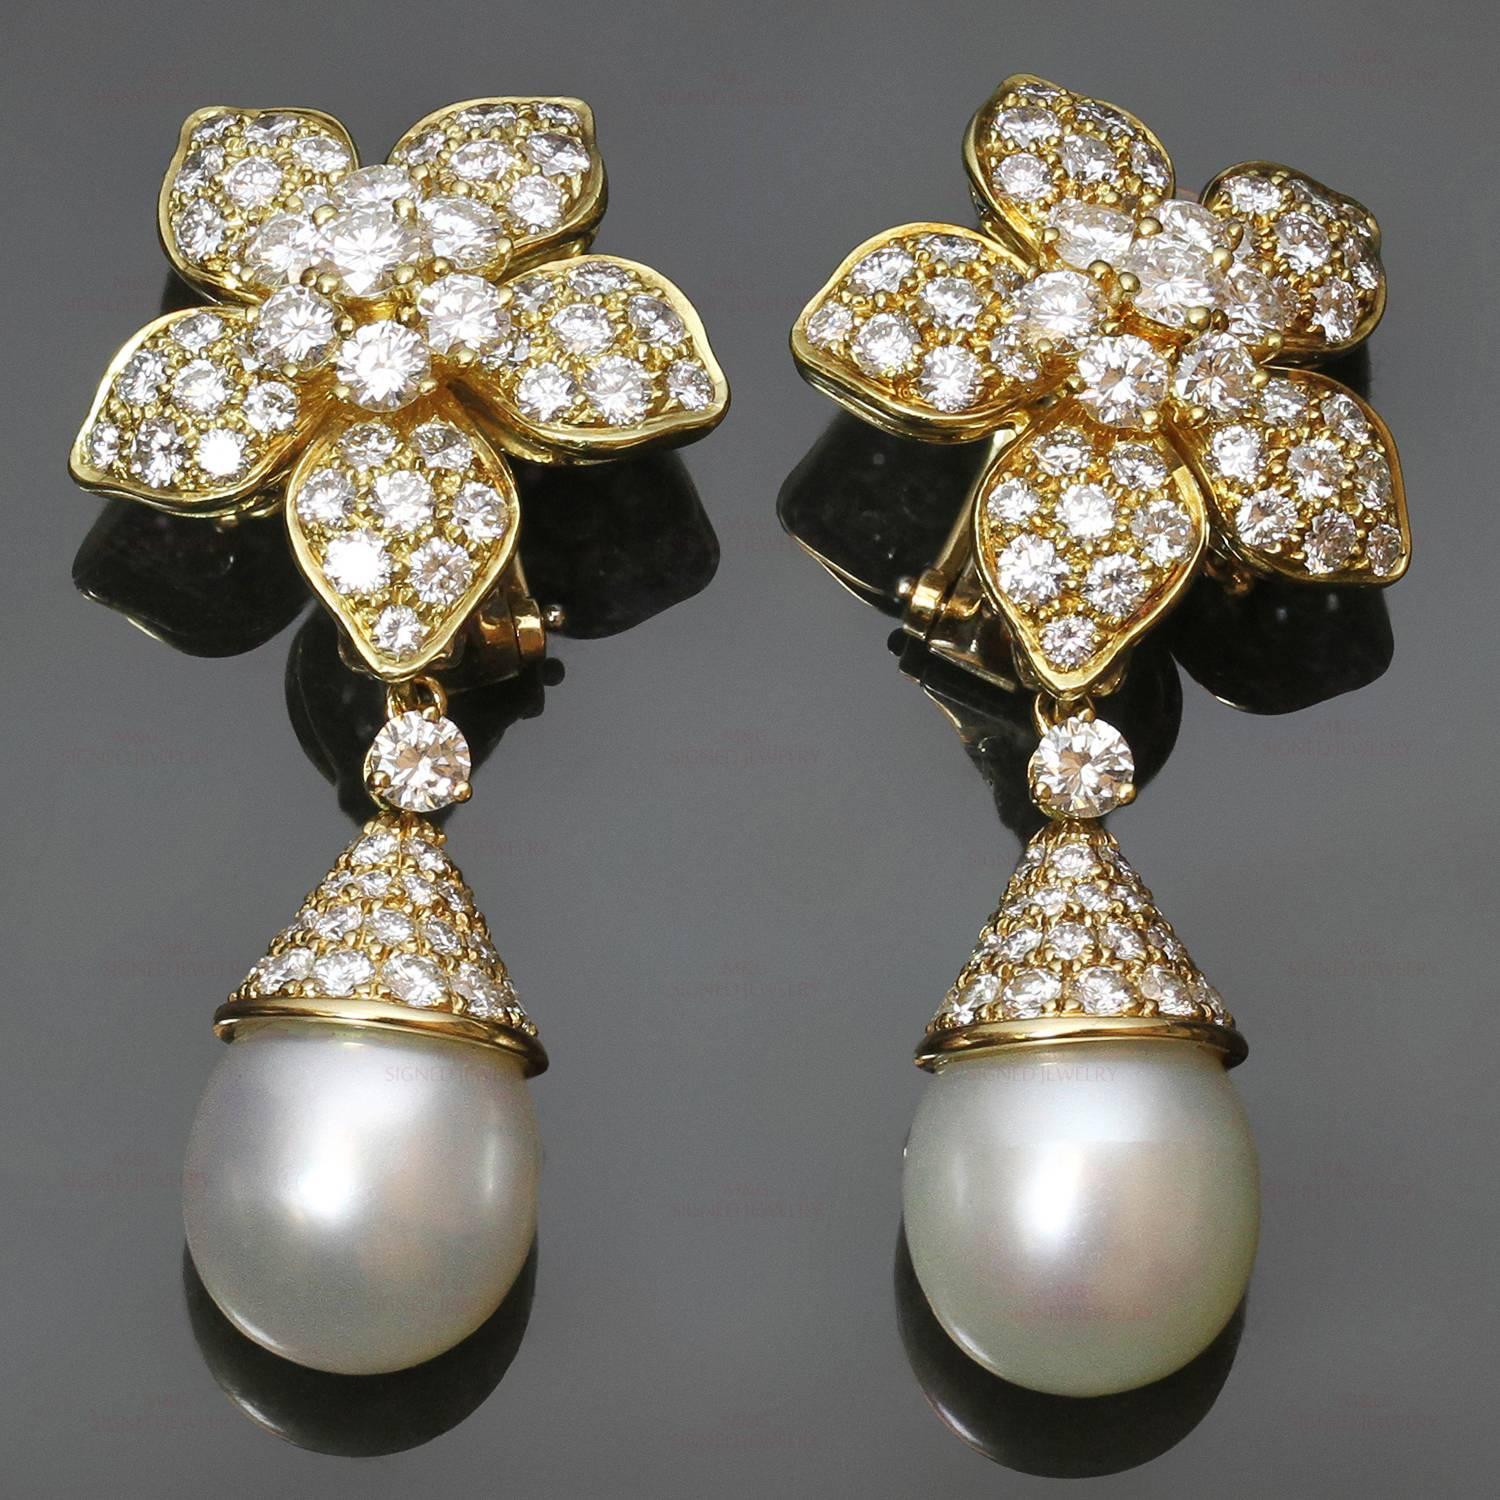 These magnificent Van Cleef & Arpels earrings are made in 18k yellow gold and feature a floral clip-on design set with sparkling round brilliant-cut E-G VVS diamonds of an estimated 7.0 carats and completed with elegant detachable South Sea